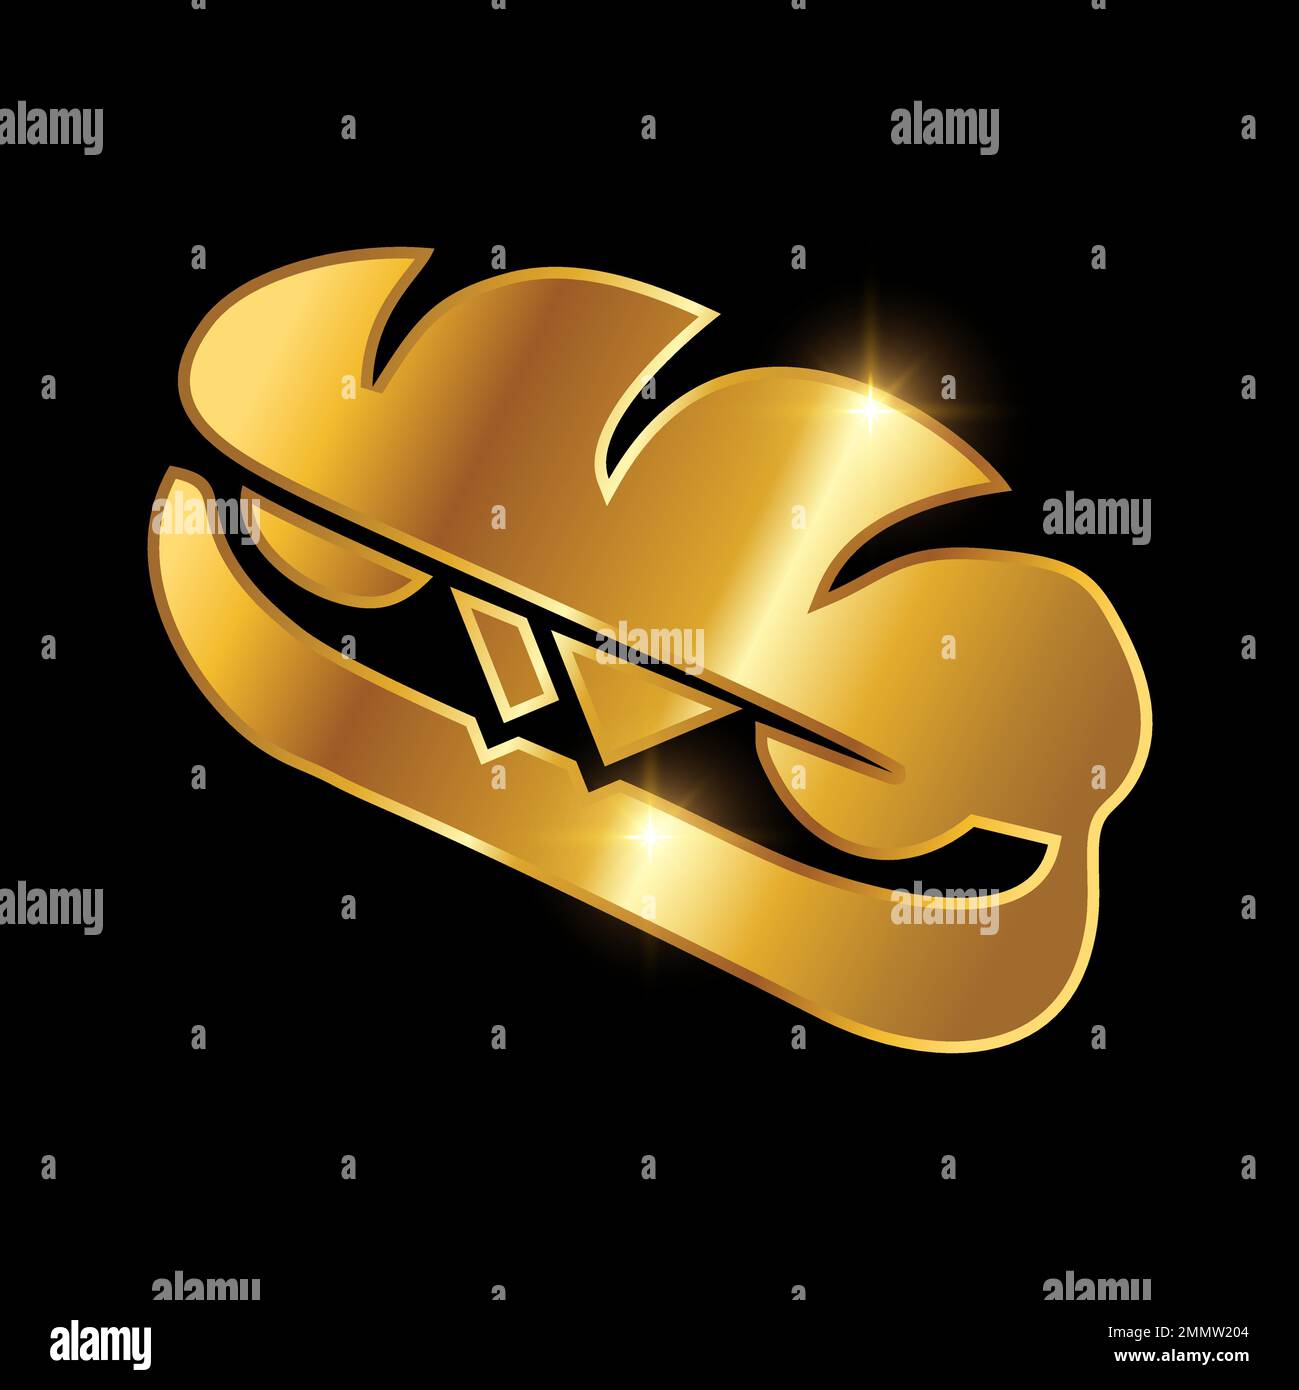 A Vector illustration of Golden Luxury Sandwich Vector Icon Logo Sign in black background with gold shine effect Stock Vector